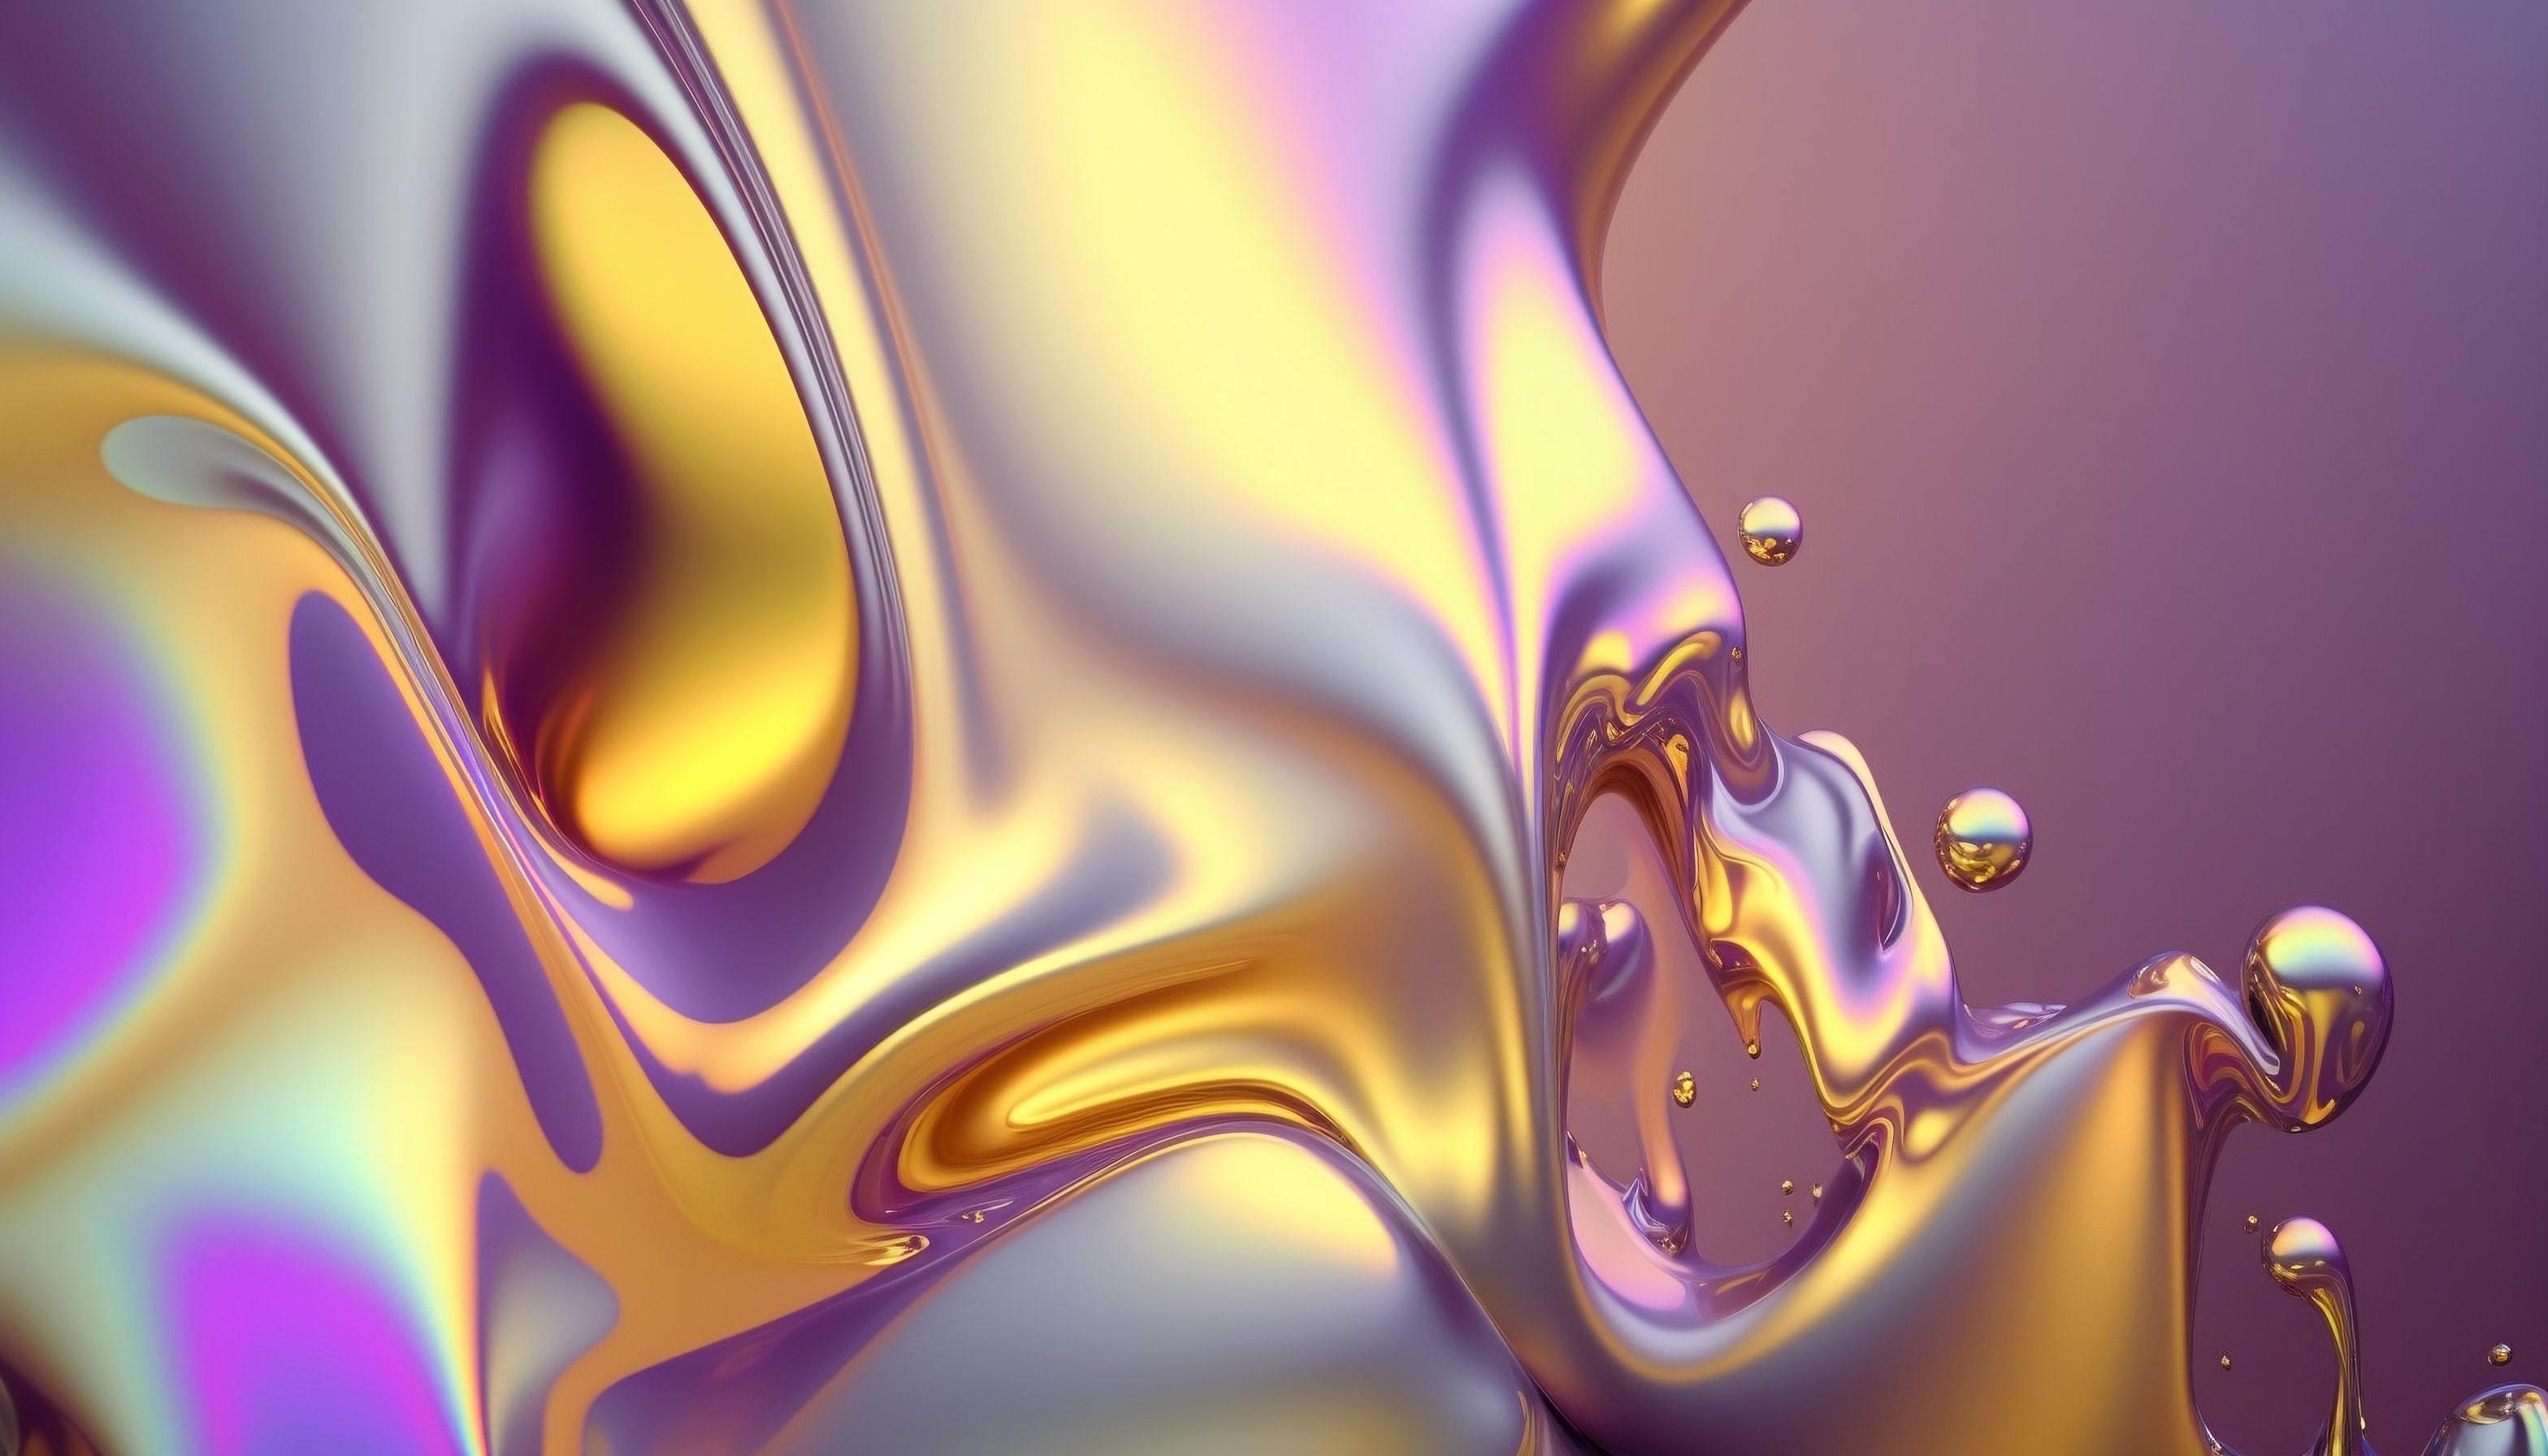 A computer generated image of a wave of metallic liquid with a purple background - Iridescent